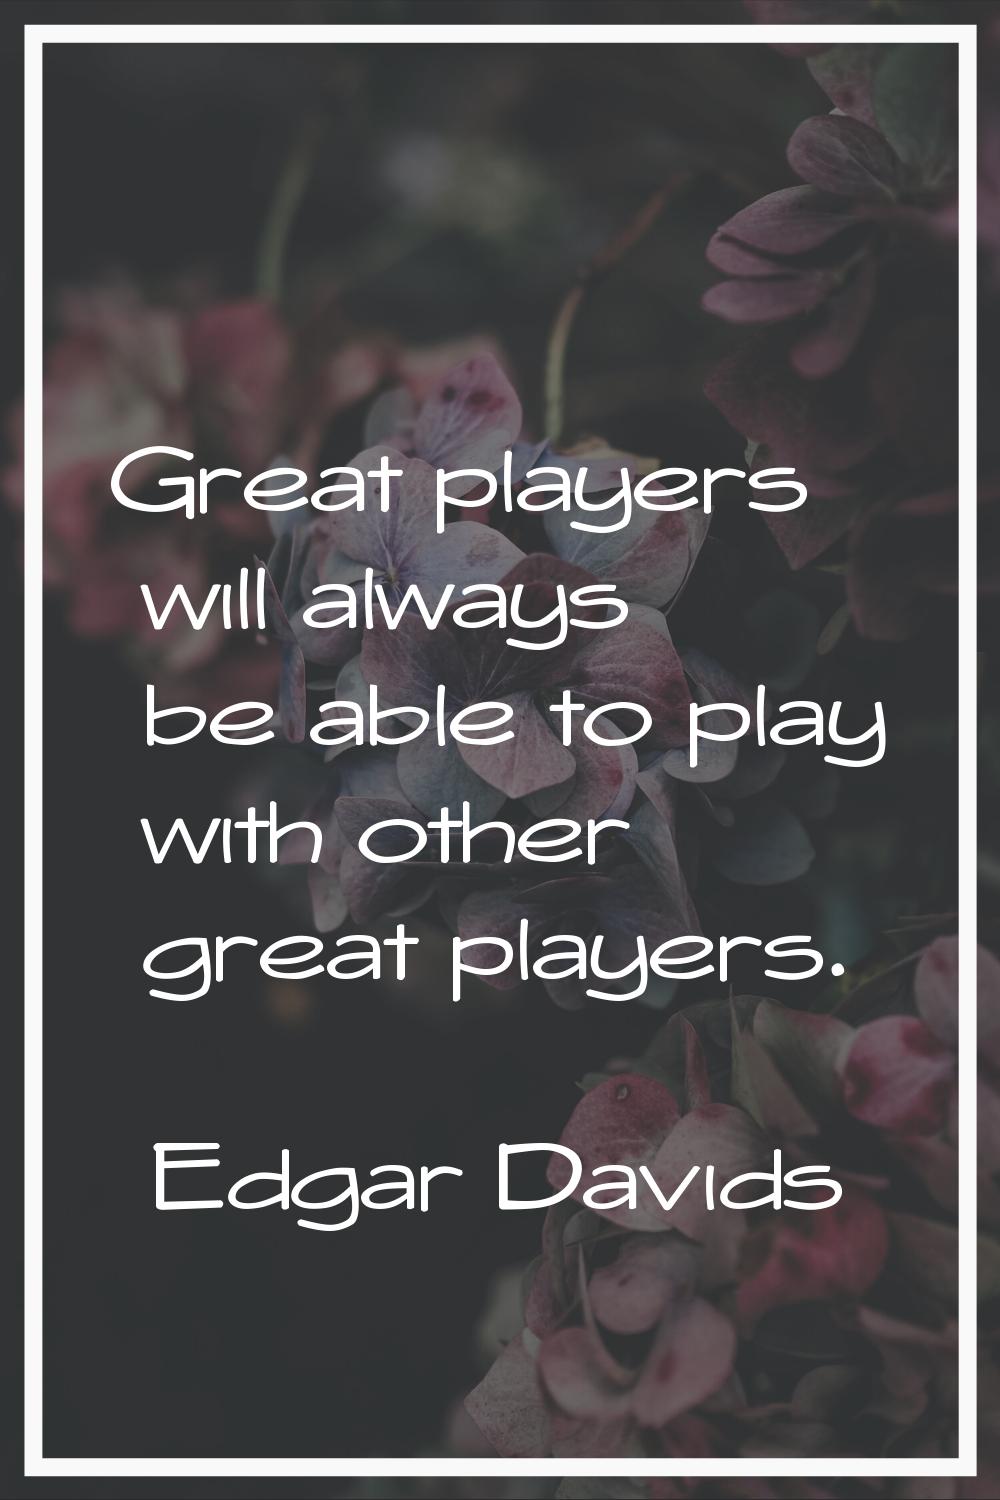 Great players will always be able to play with other great players.